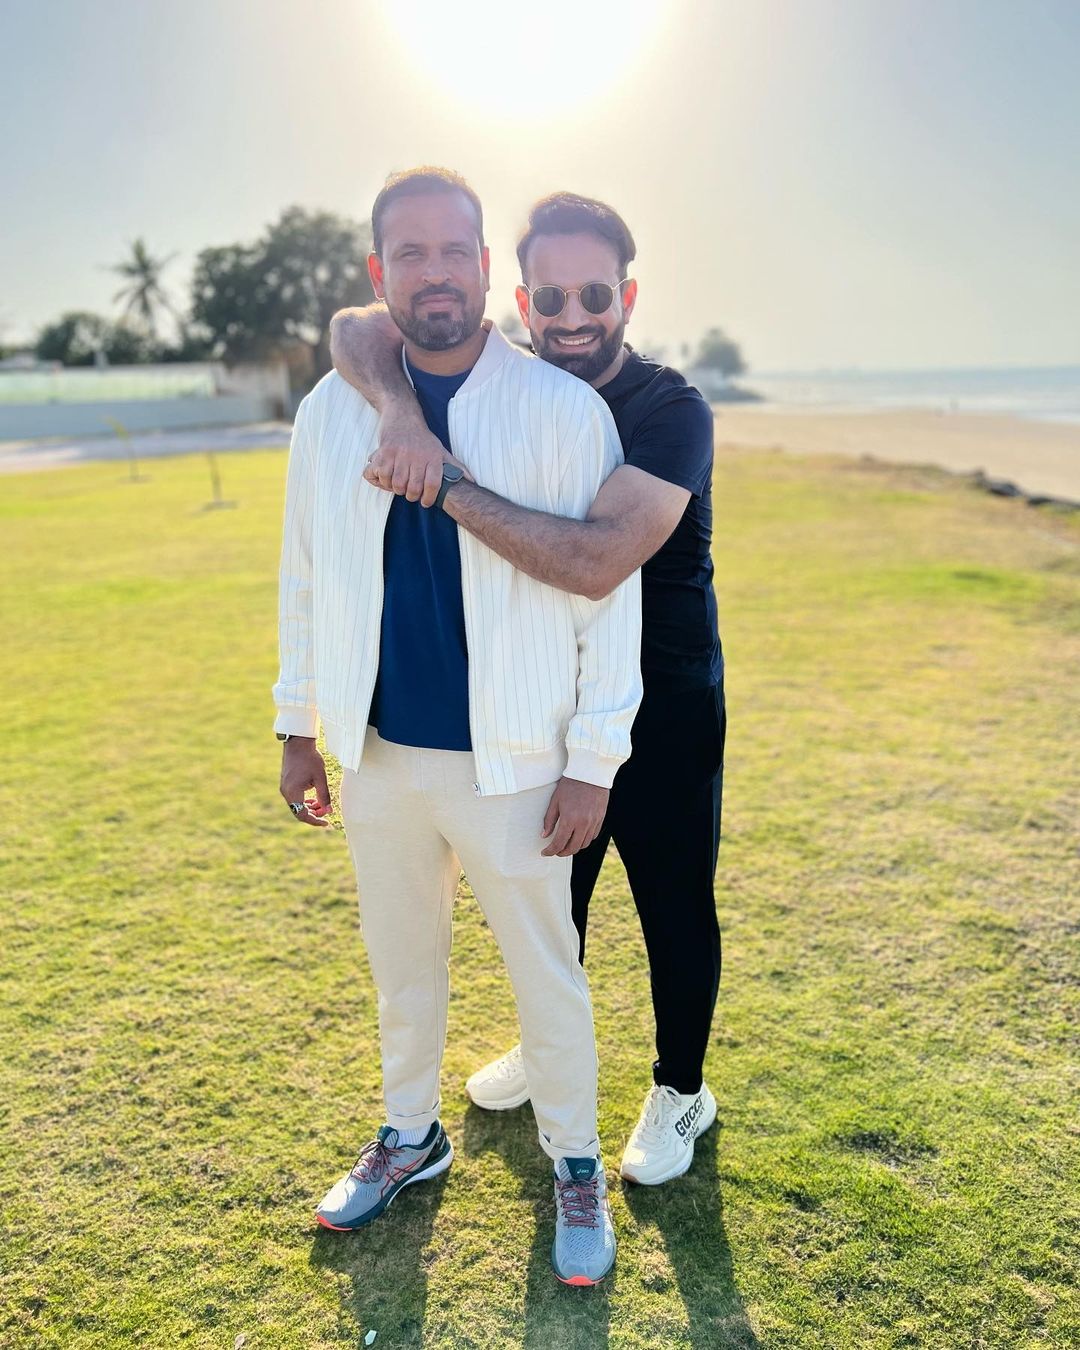 Yusuf Pathan and Irfan Pathan. (Image: Instagram)